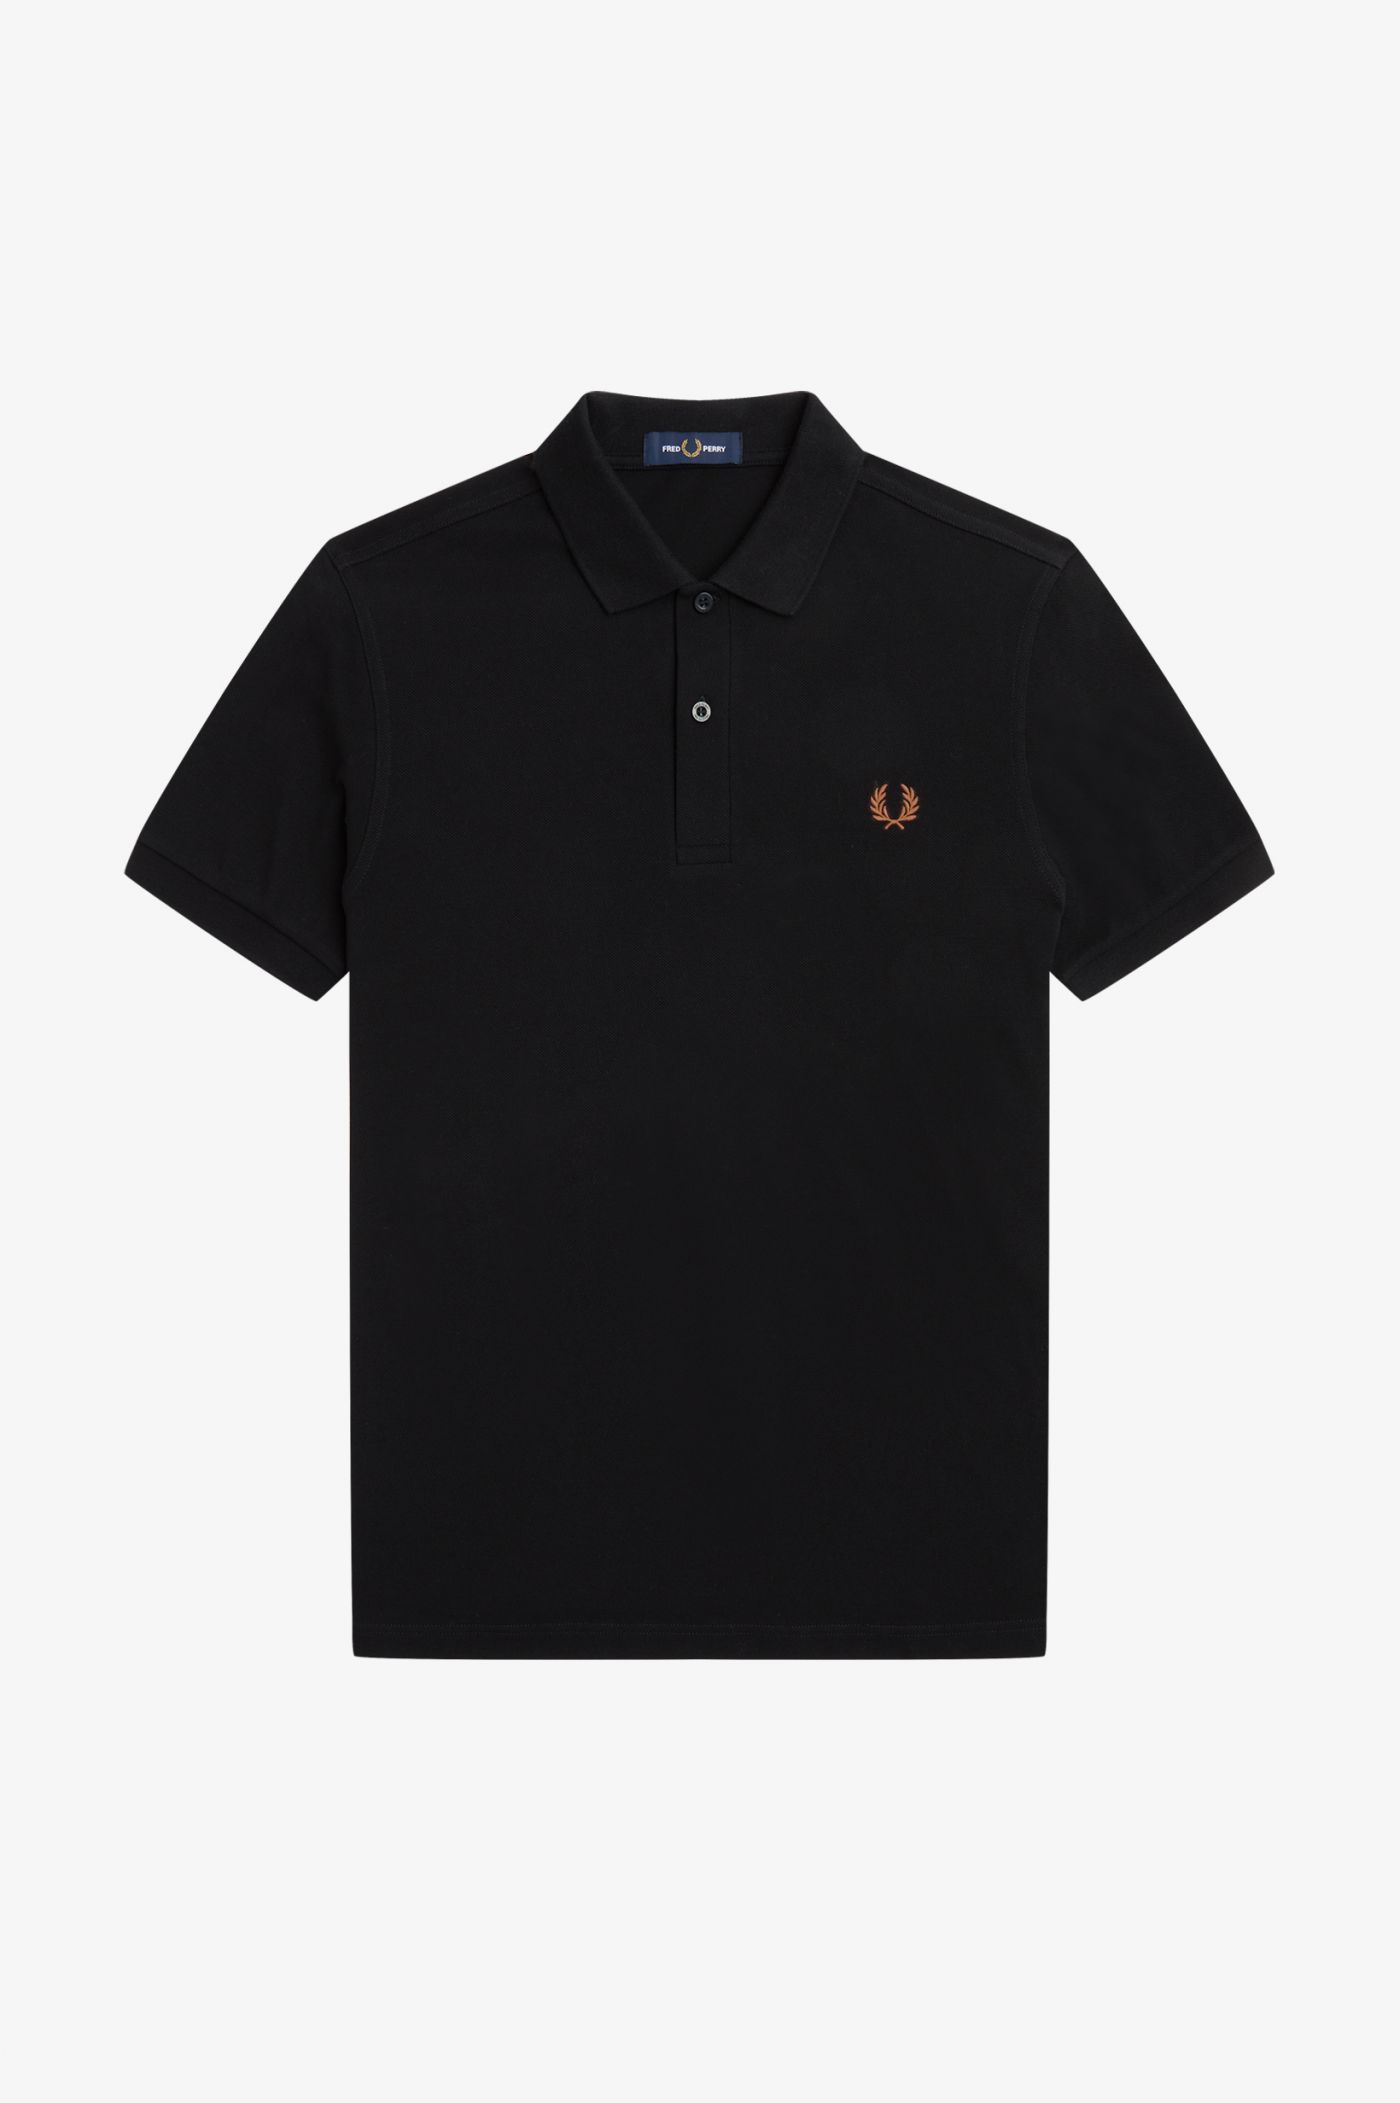 M6000 - Black | The Fred Perry Shirt | Men's Short & Long Sleeve Polo ...